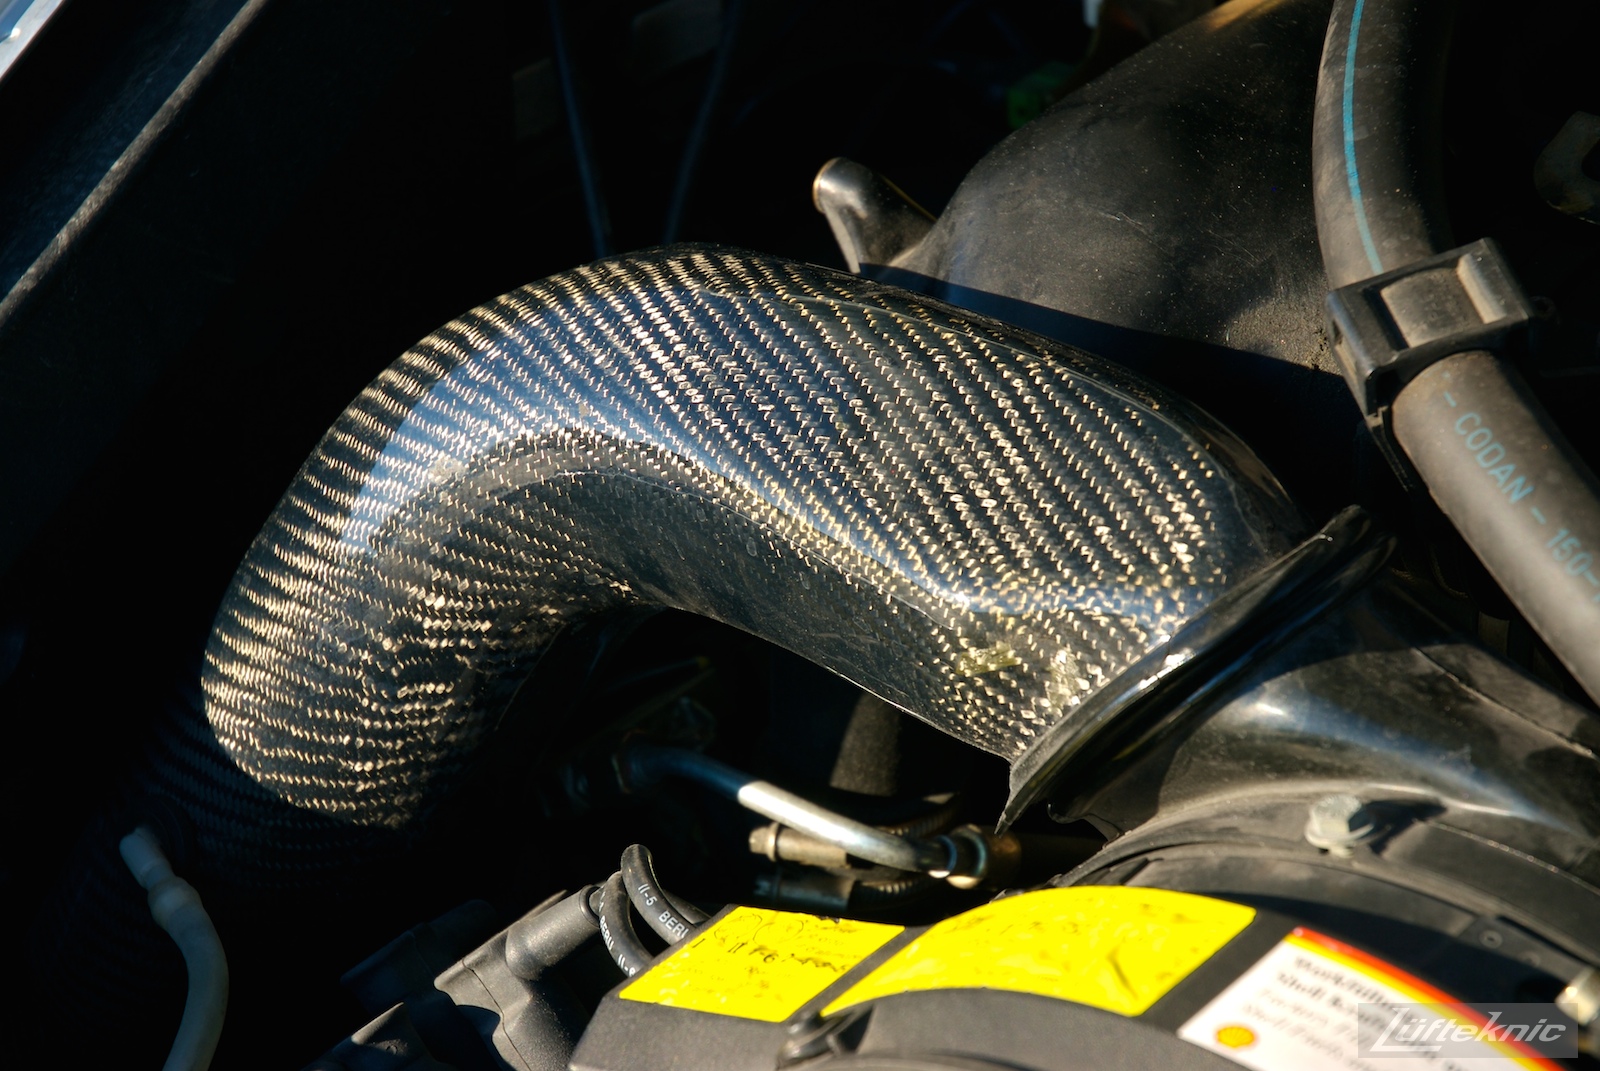 Carbon fiber engine heater pipe shown on the RS America.